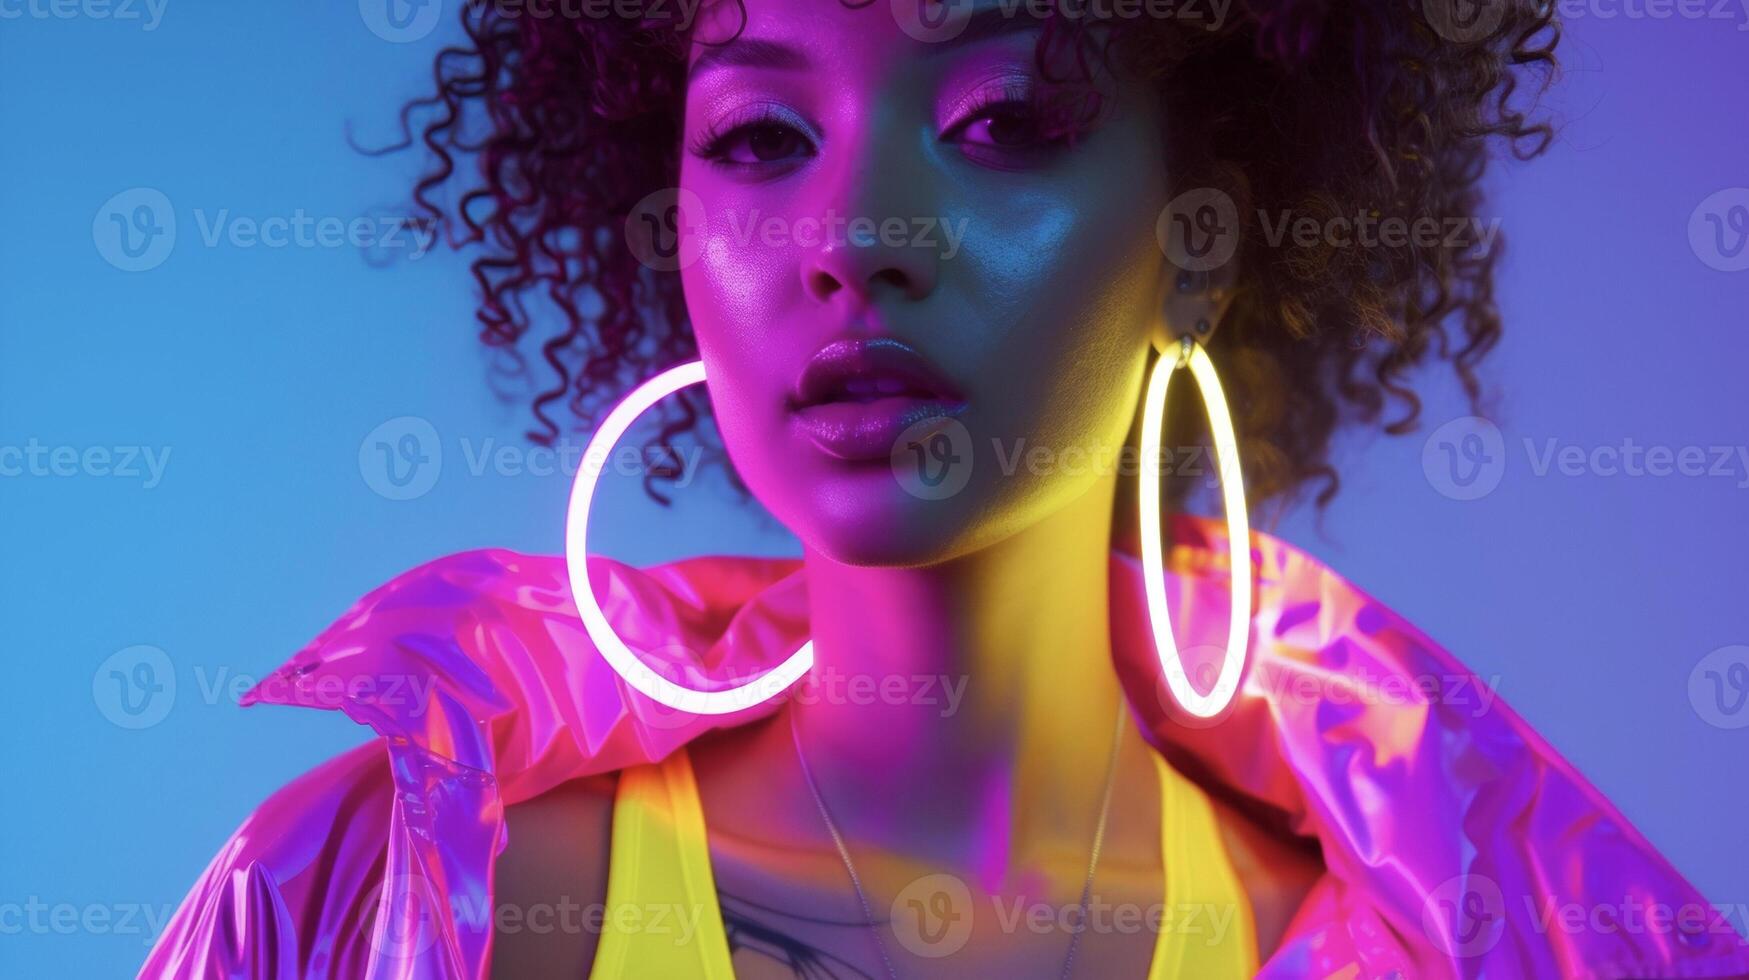 Neon Nights Embrace the bright lights of the rave with this look. A neon yellow crop top and hot pink bike shorts are topped off with a matching windbreaker and LED hoop earrings photo